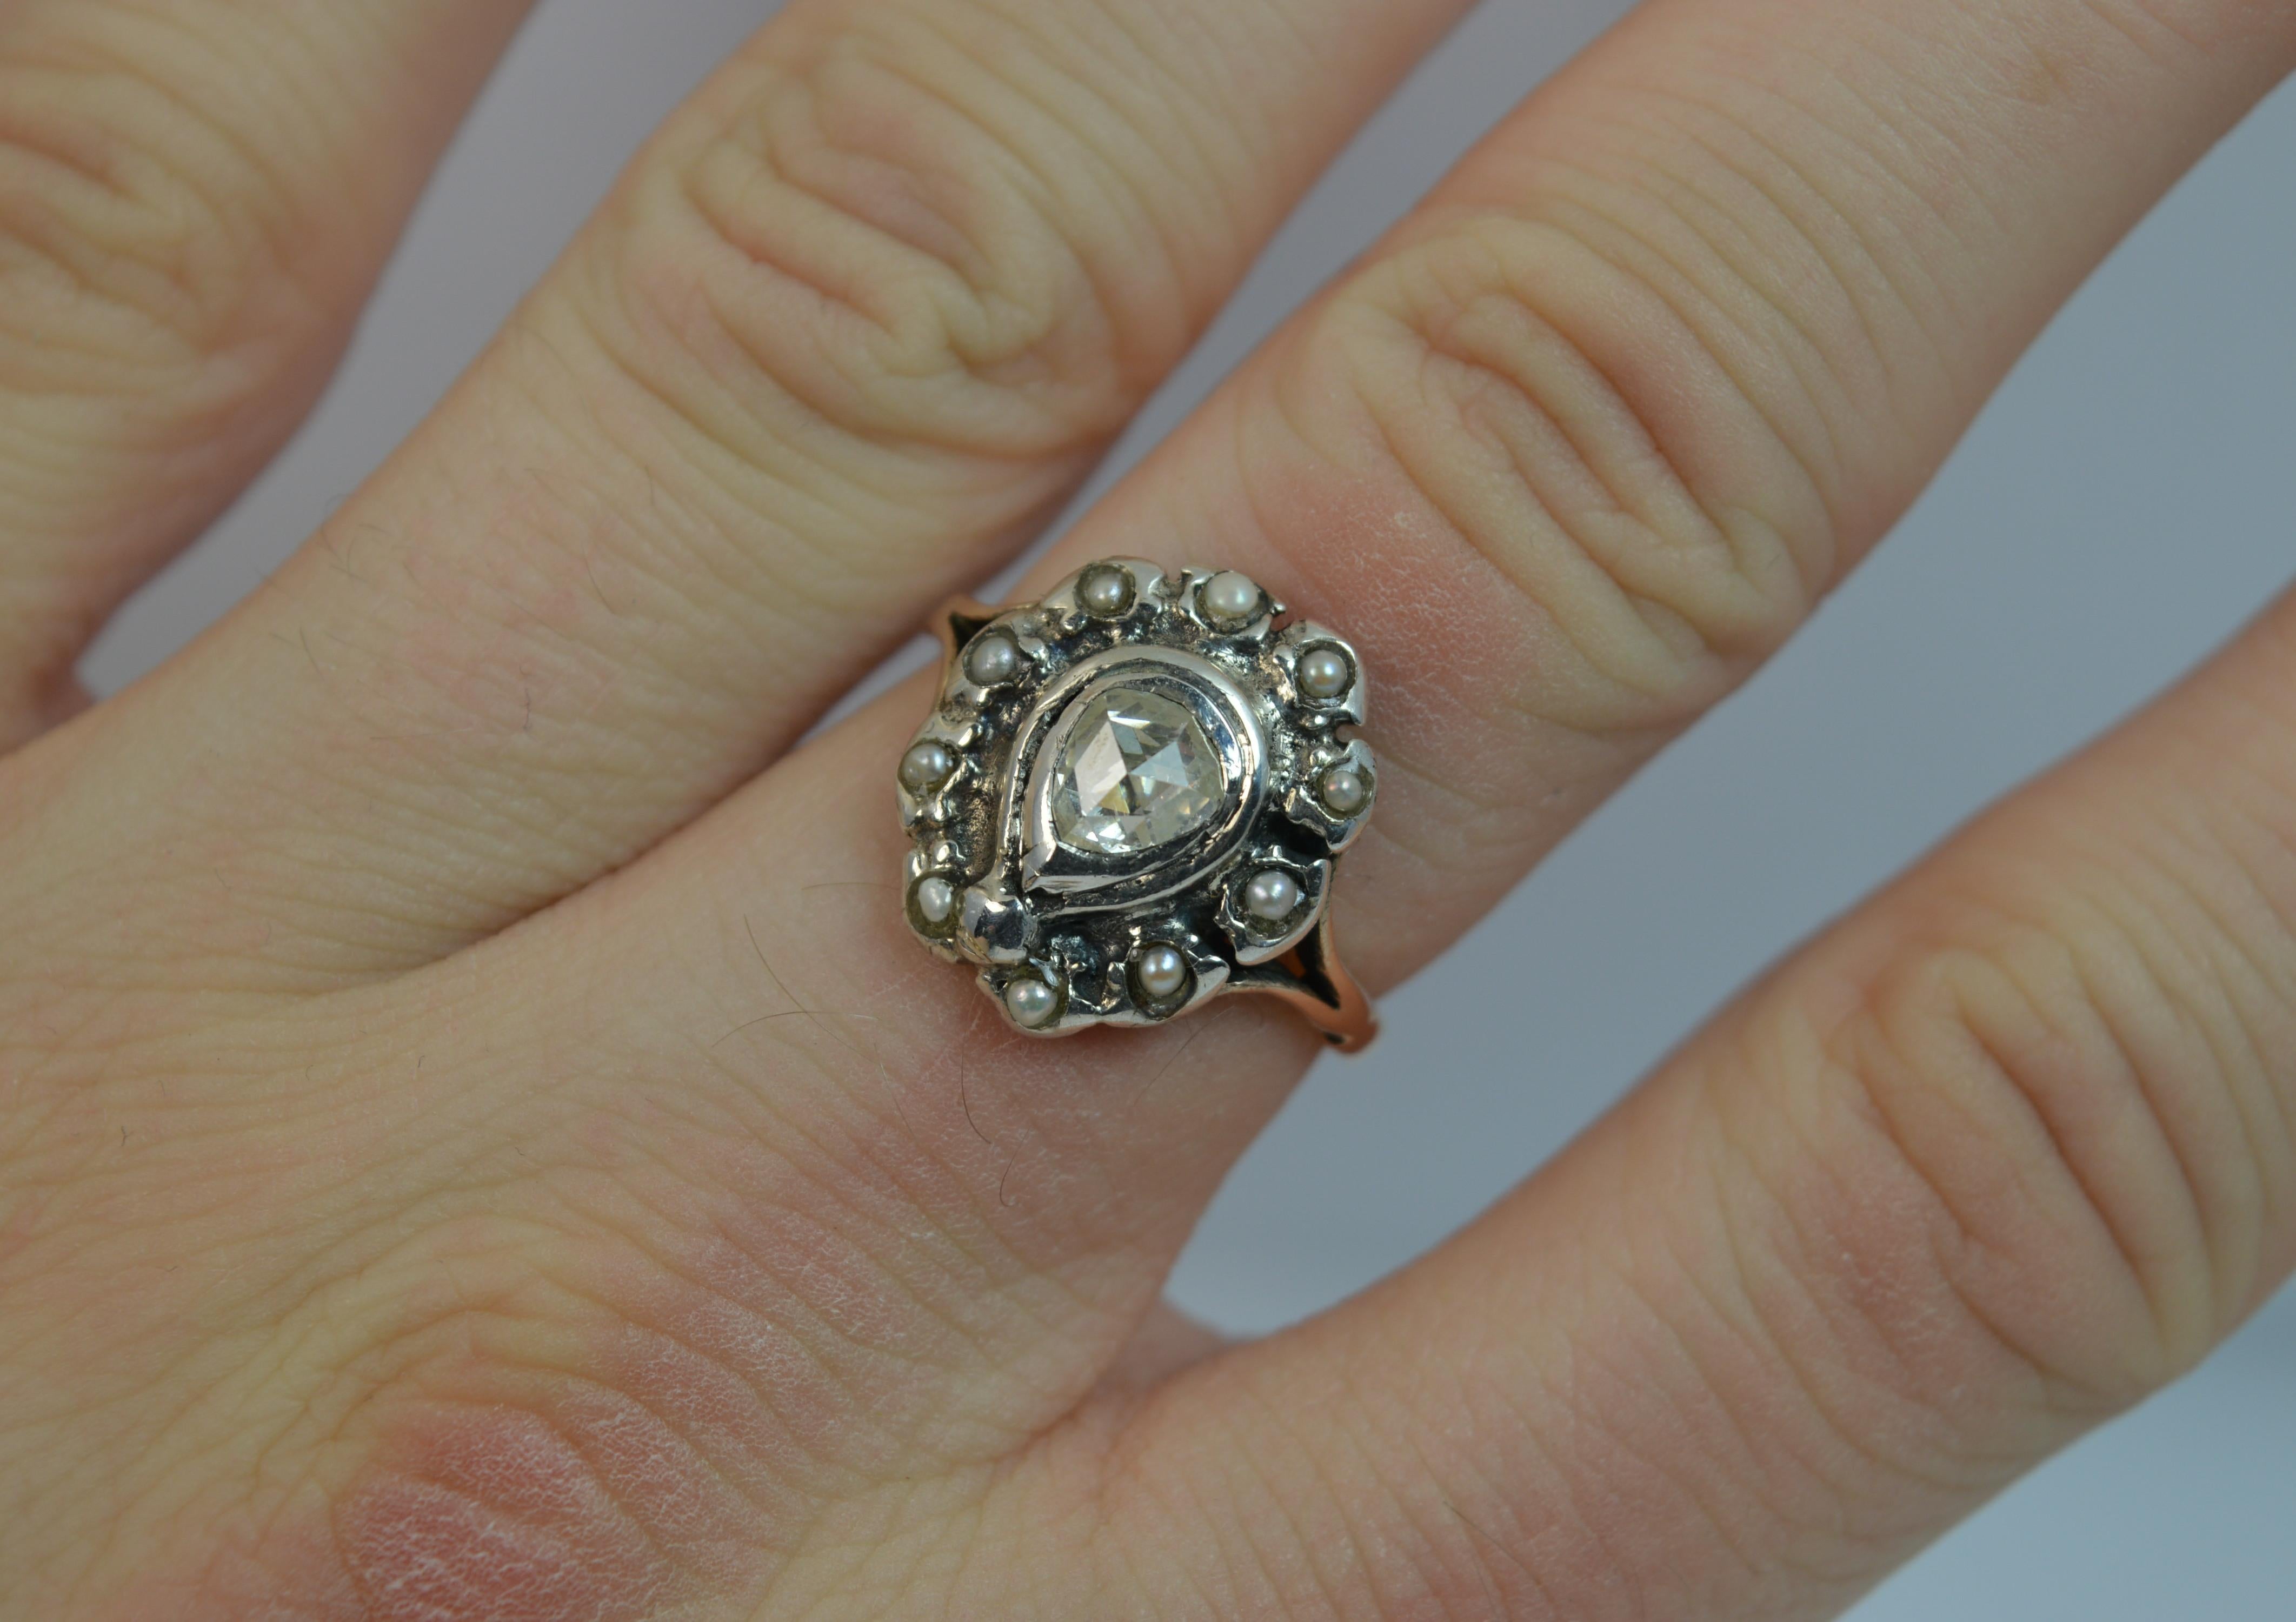 A genuine George III period cluster ring.
SIZE ; N 1/2 UK, 7 US
Modelled in 15 carat rose gold and a silver head setting typical of the period.
The rose cut pear shaped diamond to measure 5.3mm x 5.8mm approx, approx 0.70 spread with full seed pearl